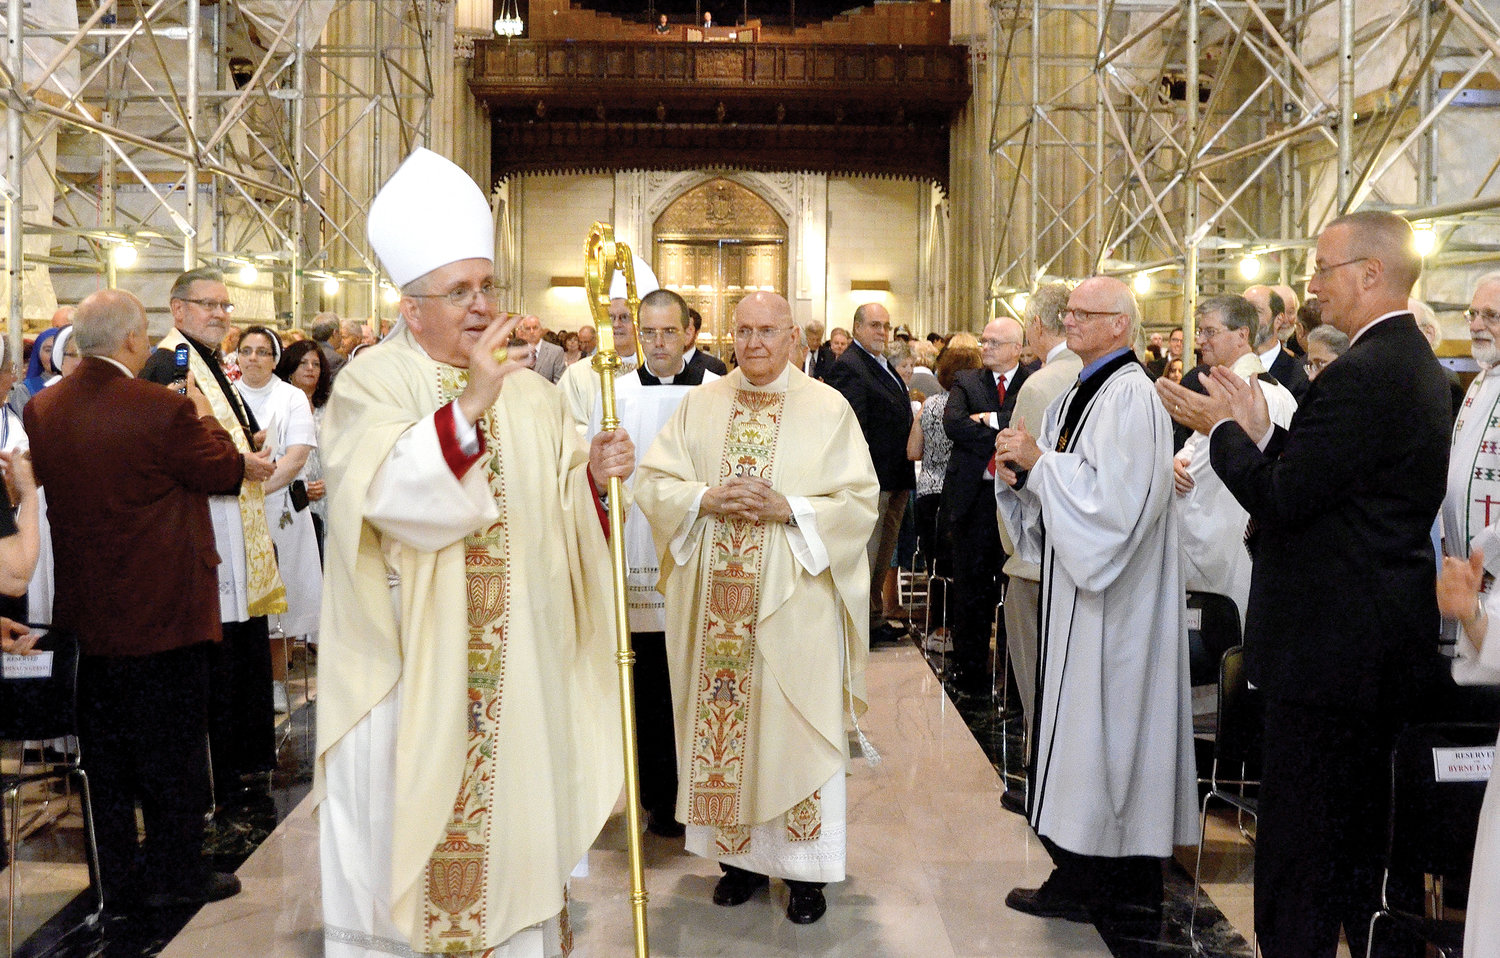 Auxiliary Bishop John J. O’Hara offers blessings at August 2014 Mass in St. Patrick’s Cathedral in which Cardinal Dolan ordained him to the episcopacy.